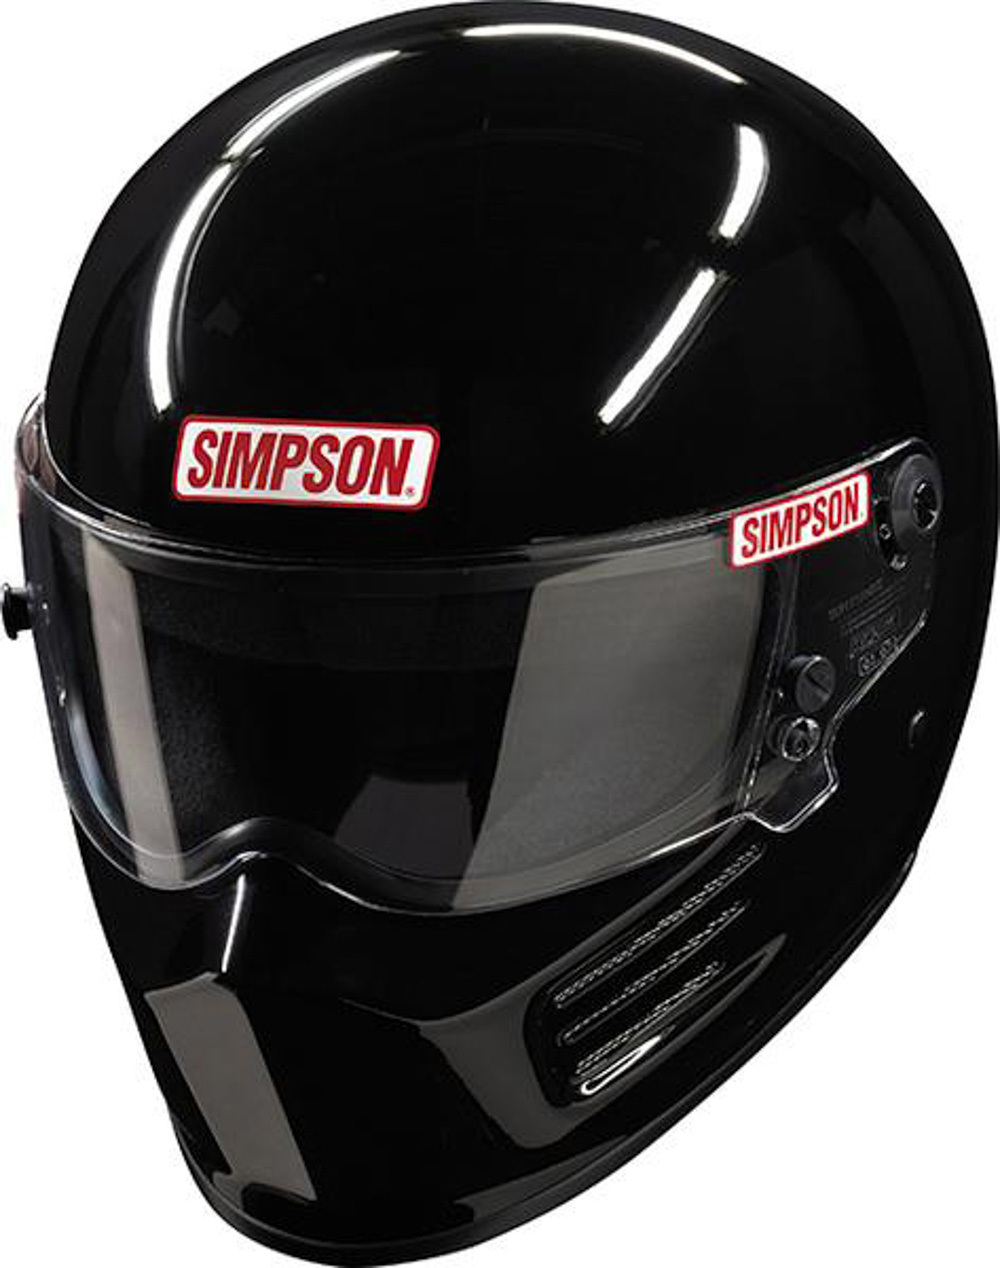 Simpson Safety 7200012 Helmet, Bandit, Snell SA2020, Head and Neck Support Ready, Black, Small, Each